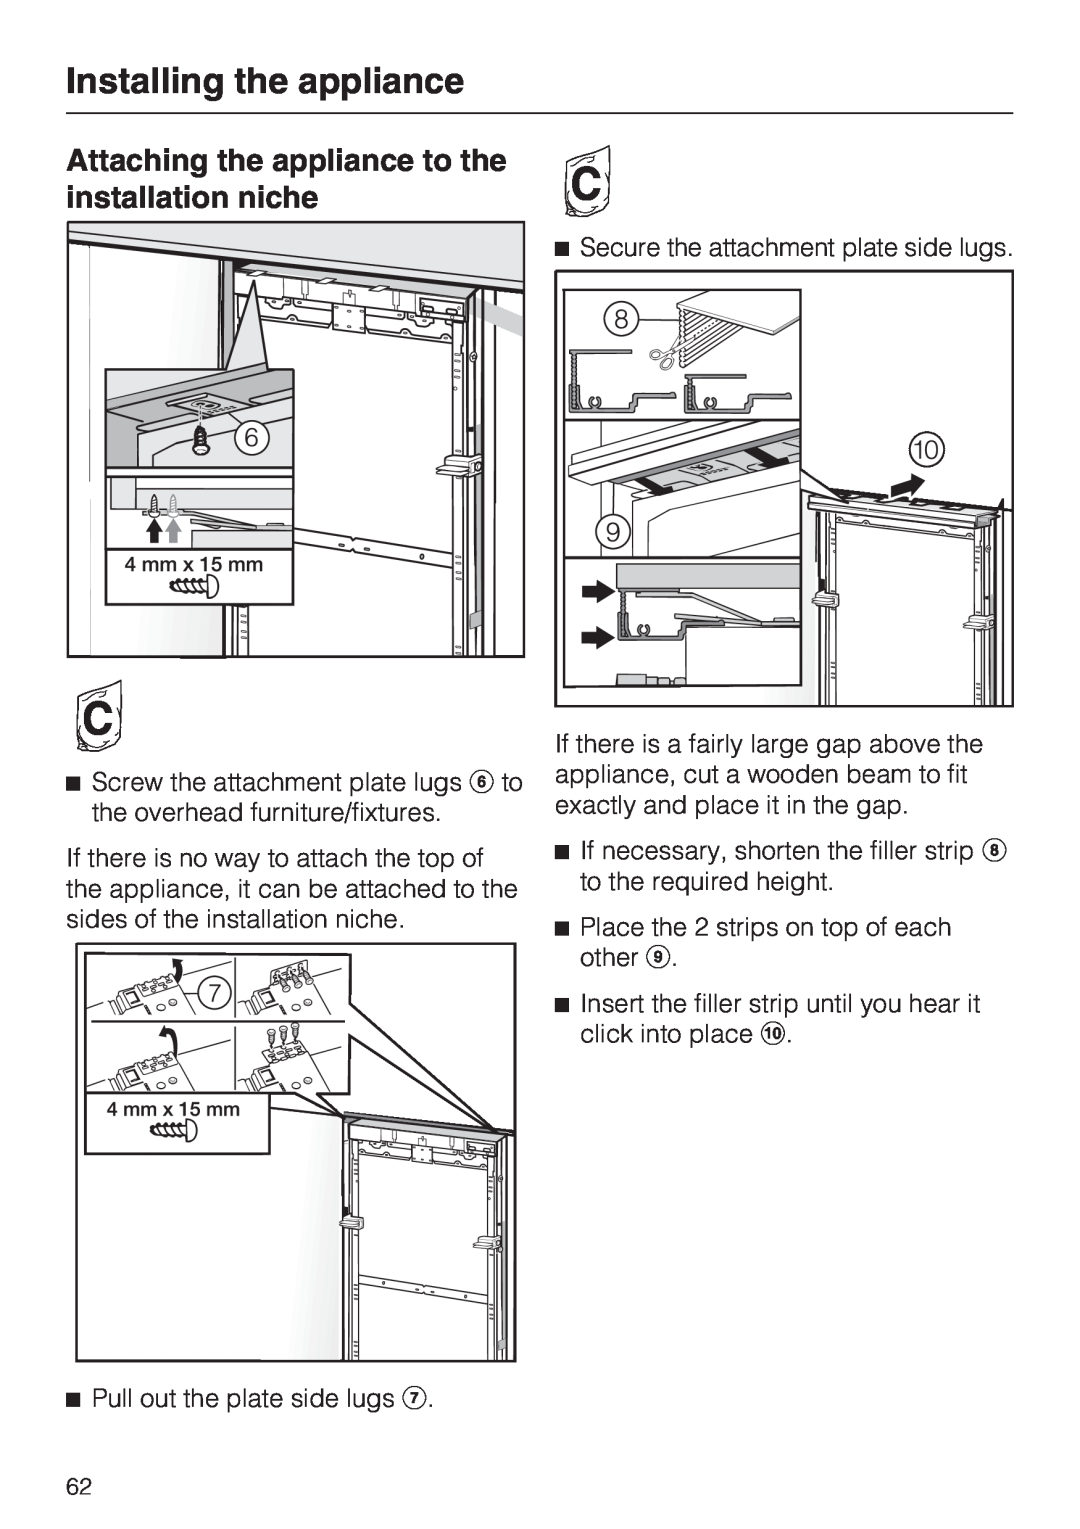 Miele F 1411 Vi installation instructions Attaching the appliance to the installation niche, Installing the appliance 